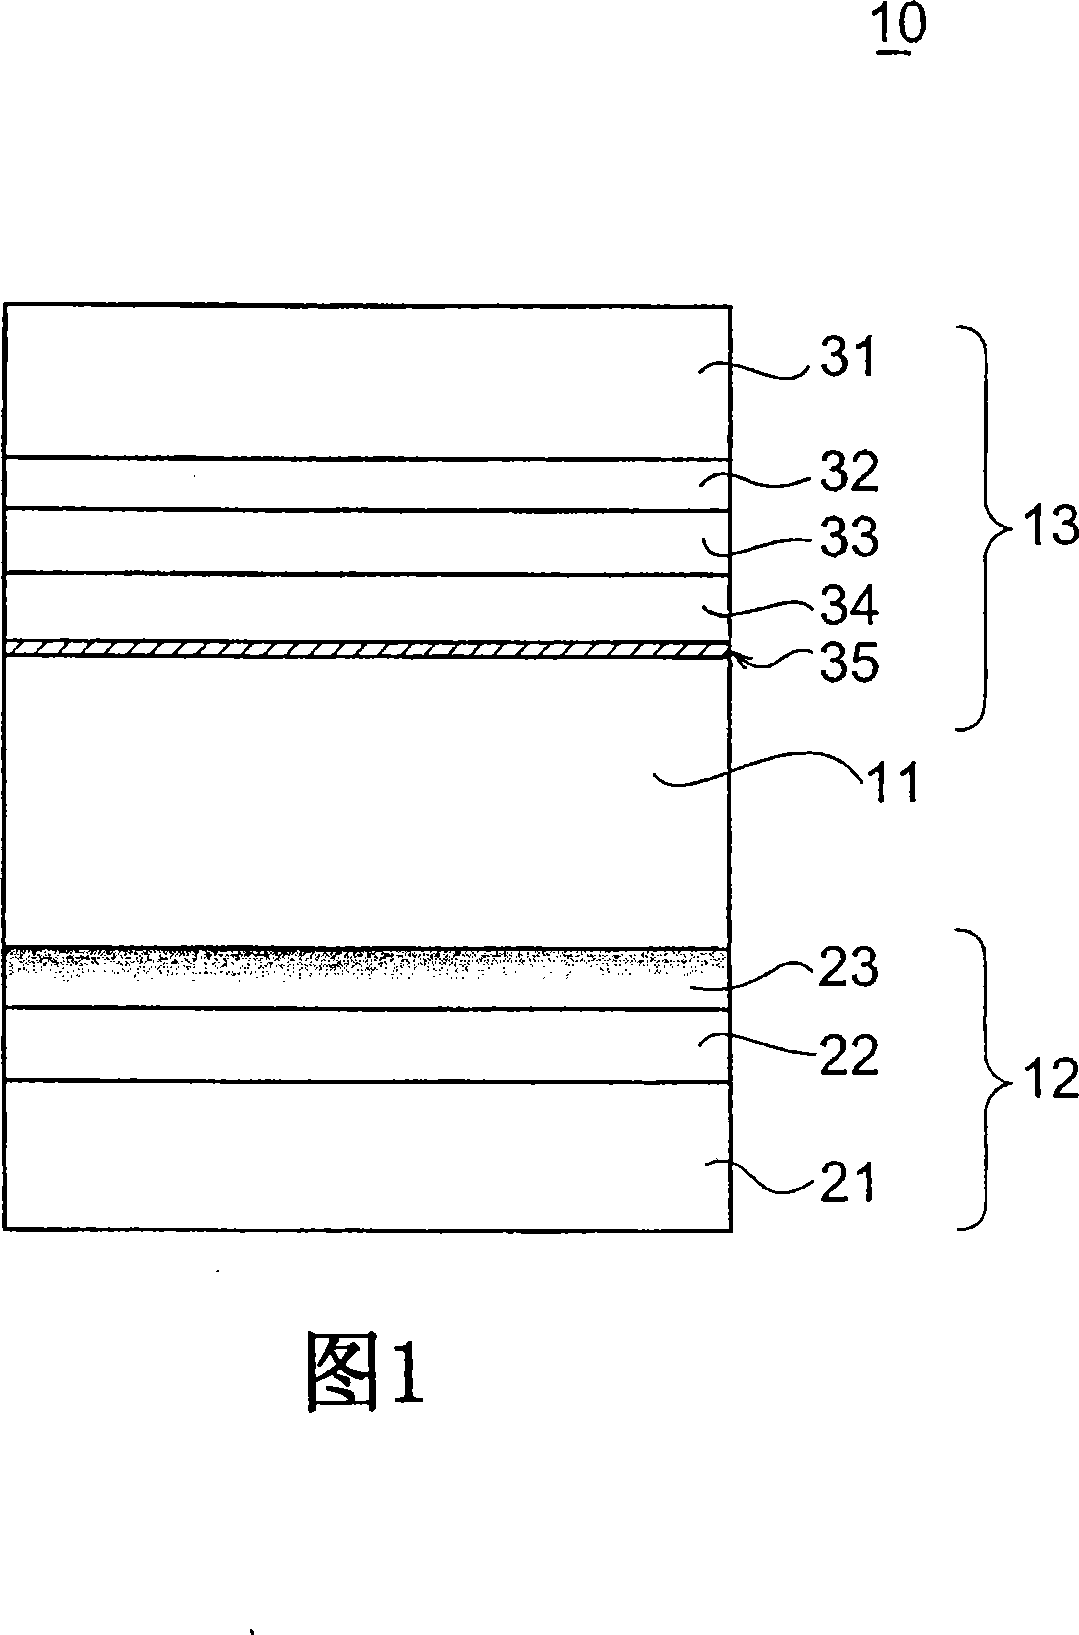 Ips-mode LCD device having an improved image quality